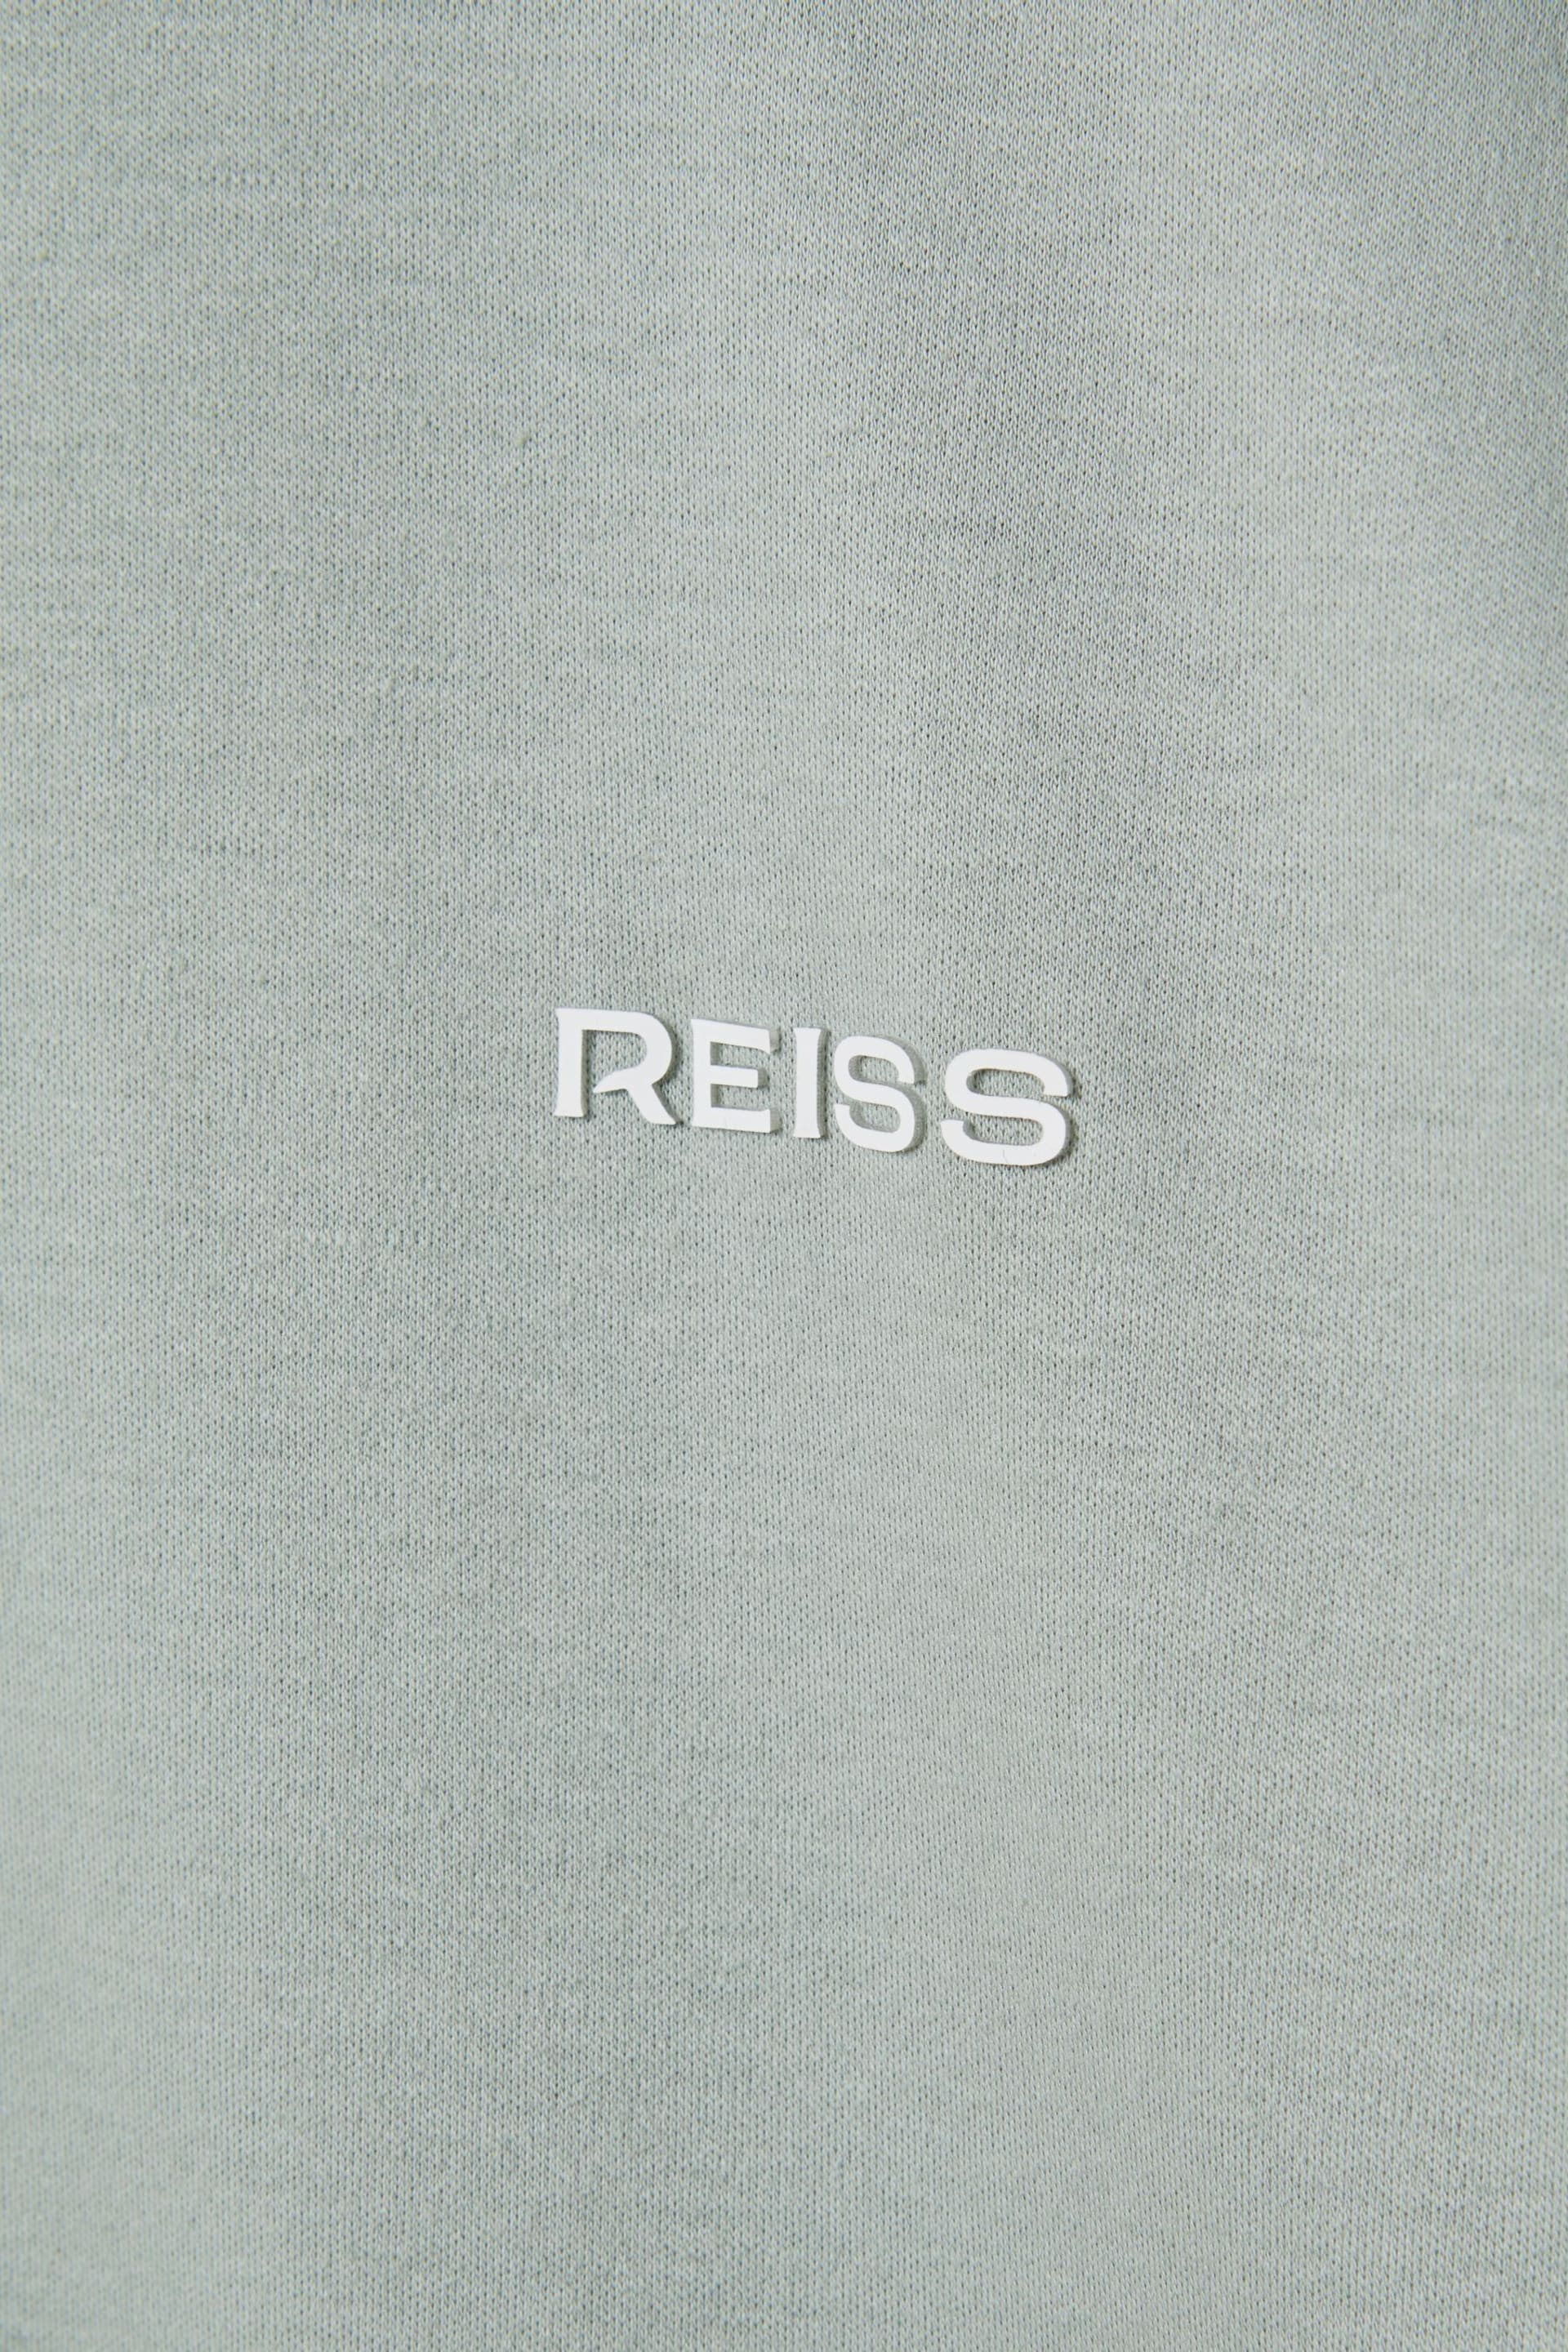 Reiss Sage Owens Slim Fit Cotton Polo Shirt - Image 6 of 6